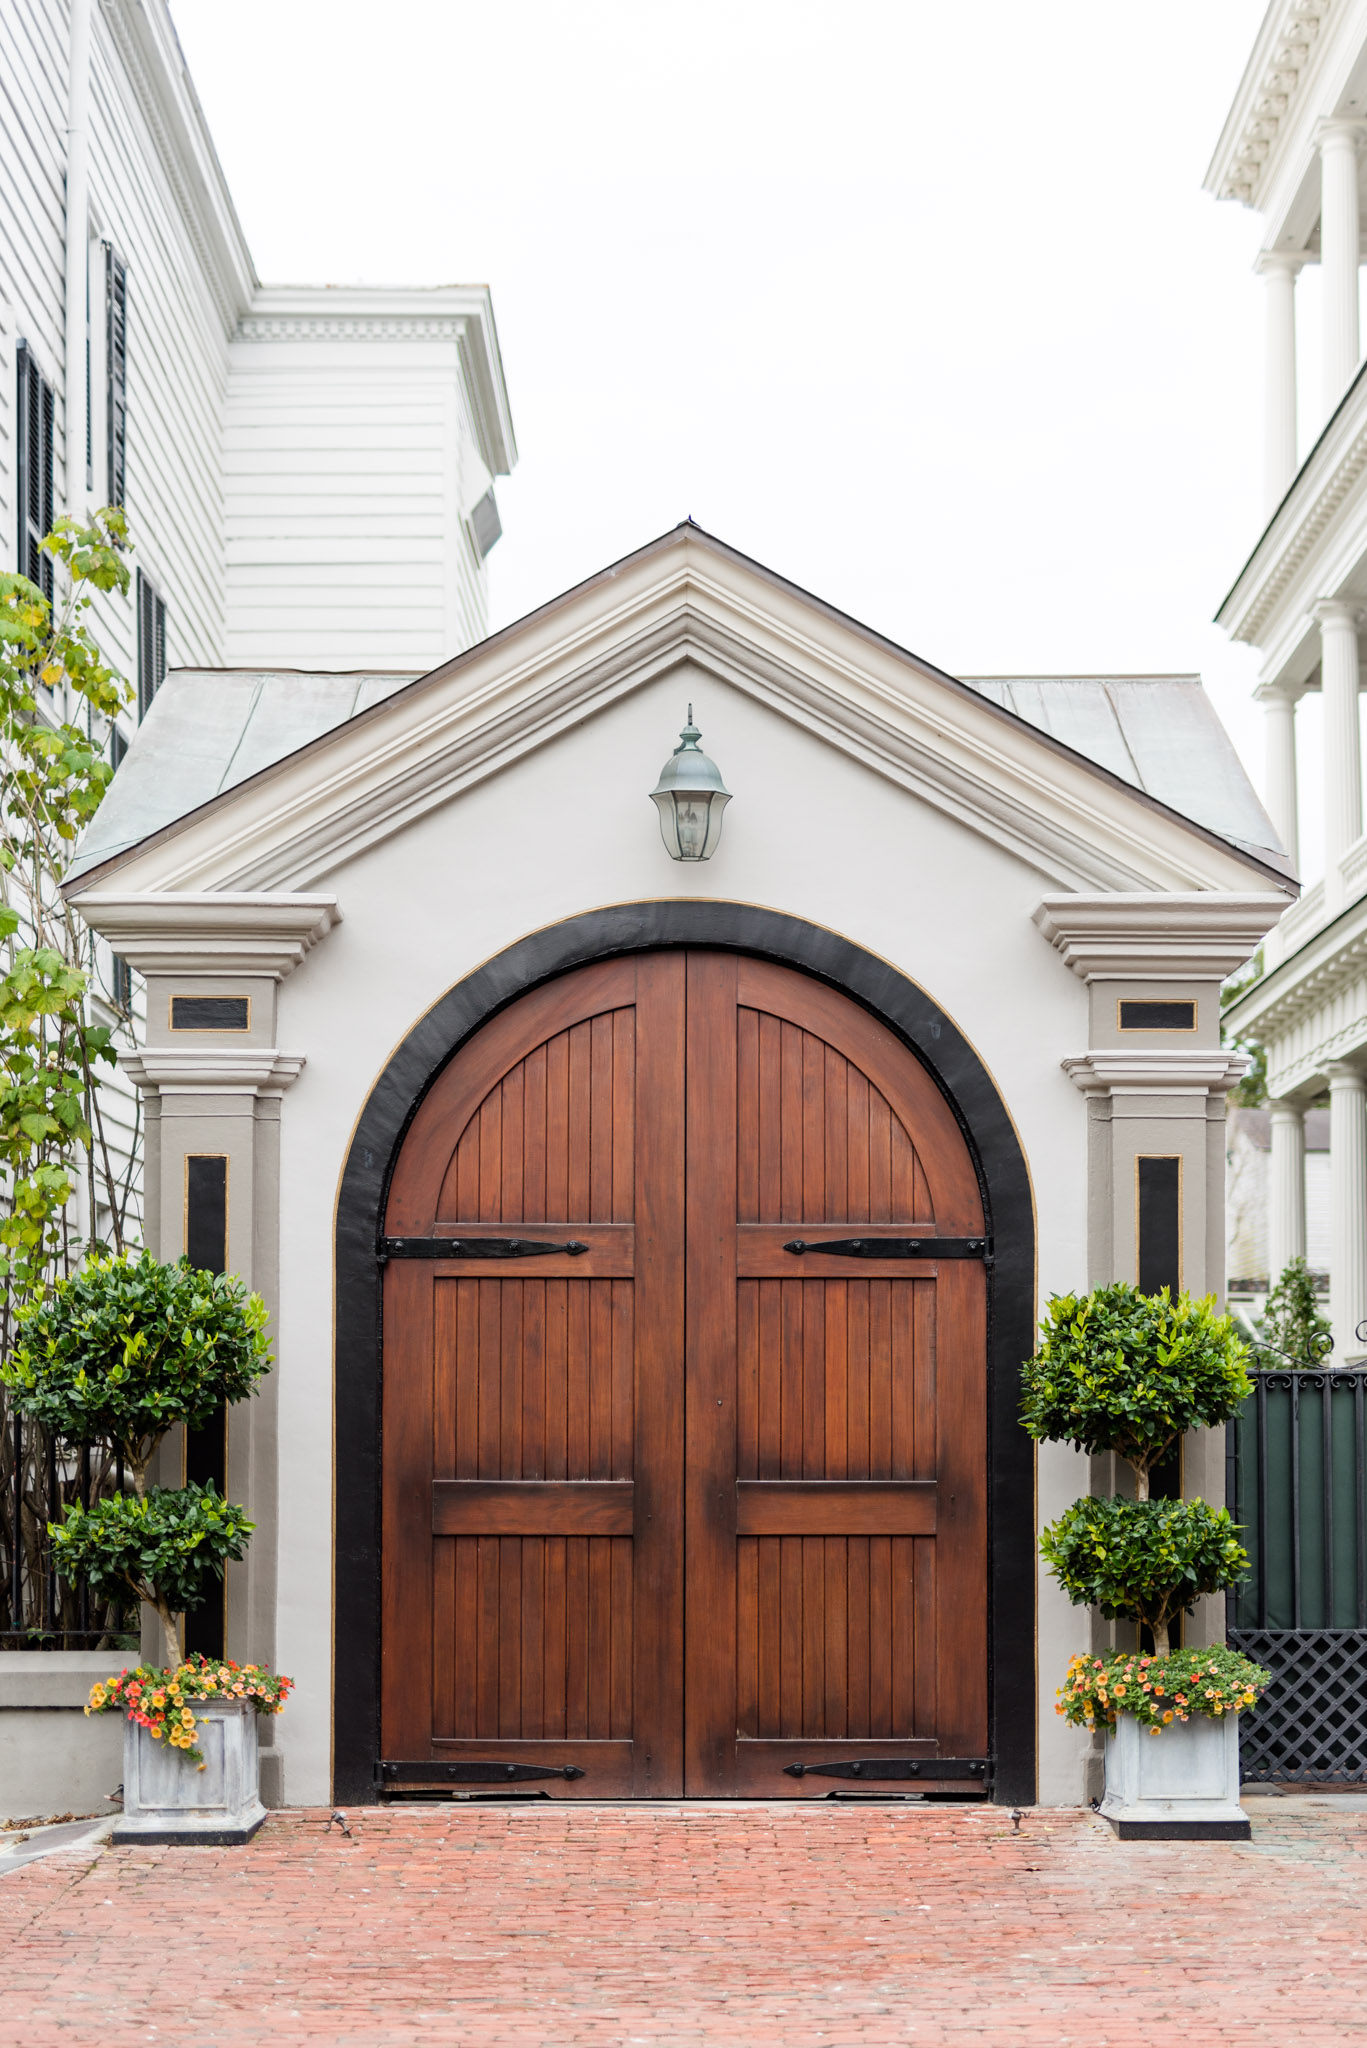 large wooden doors on white building